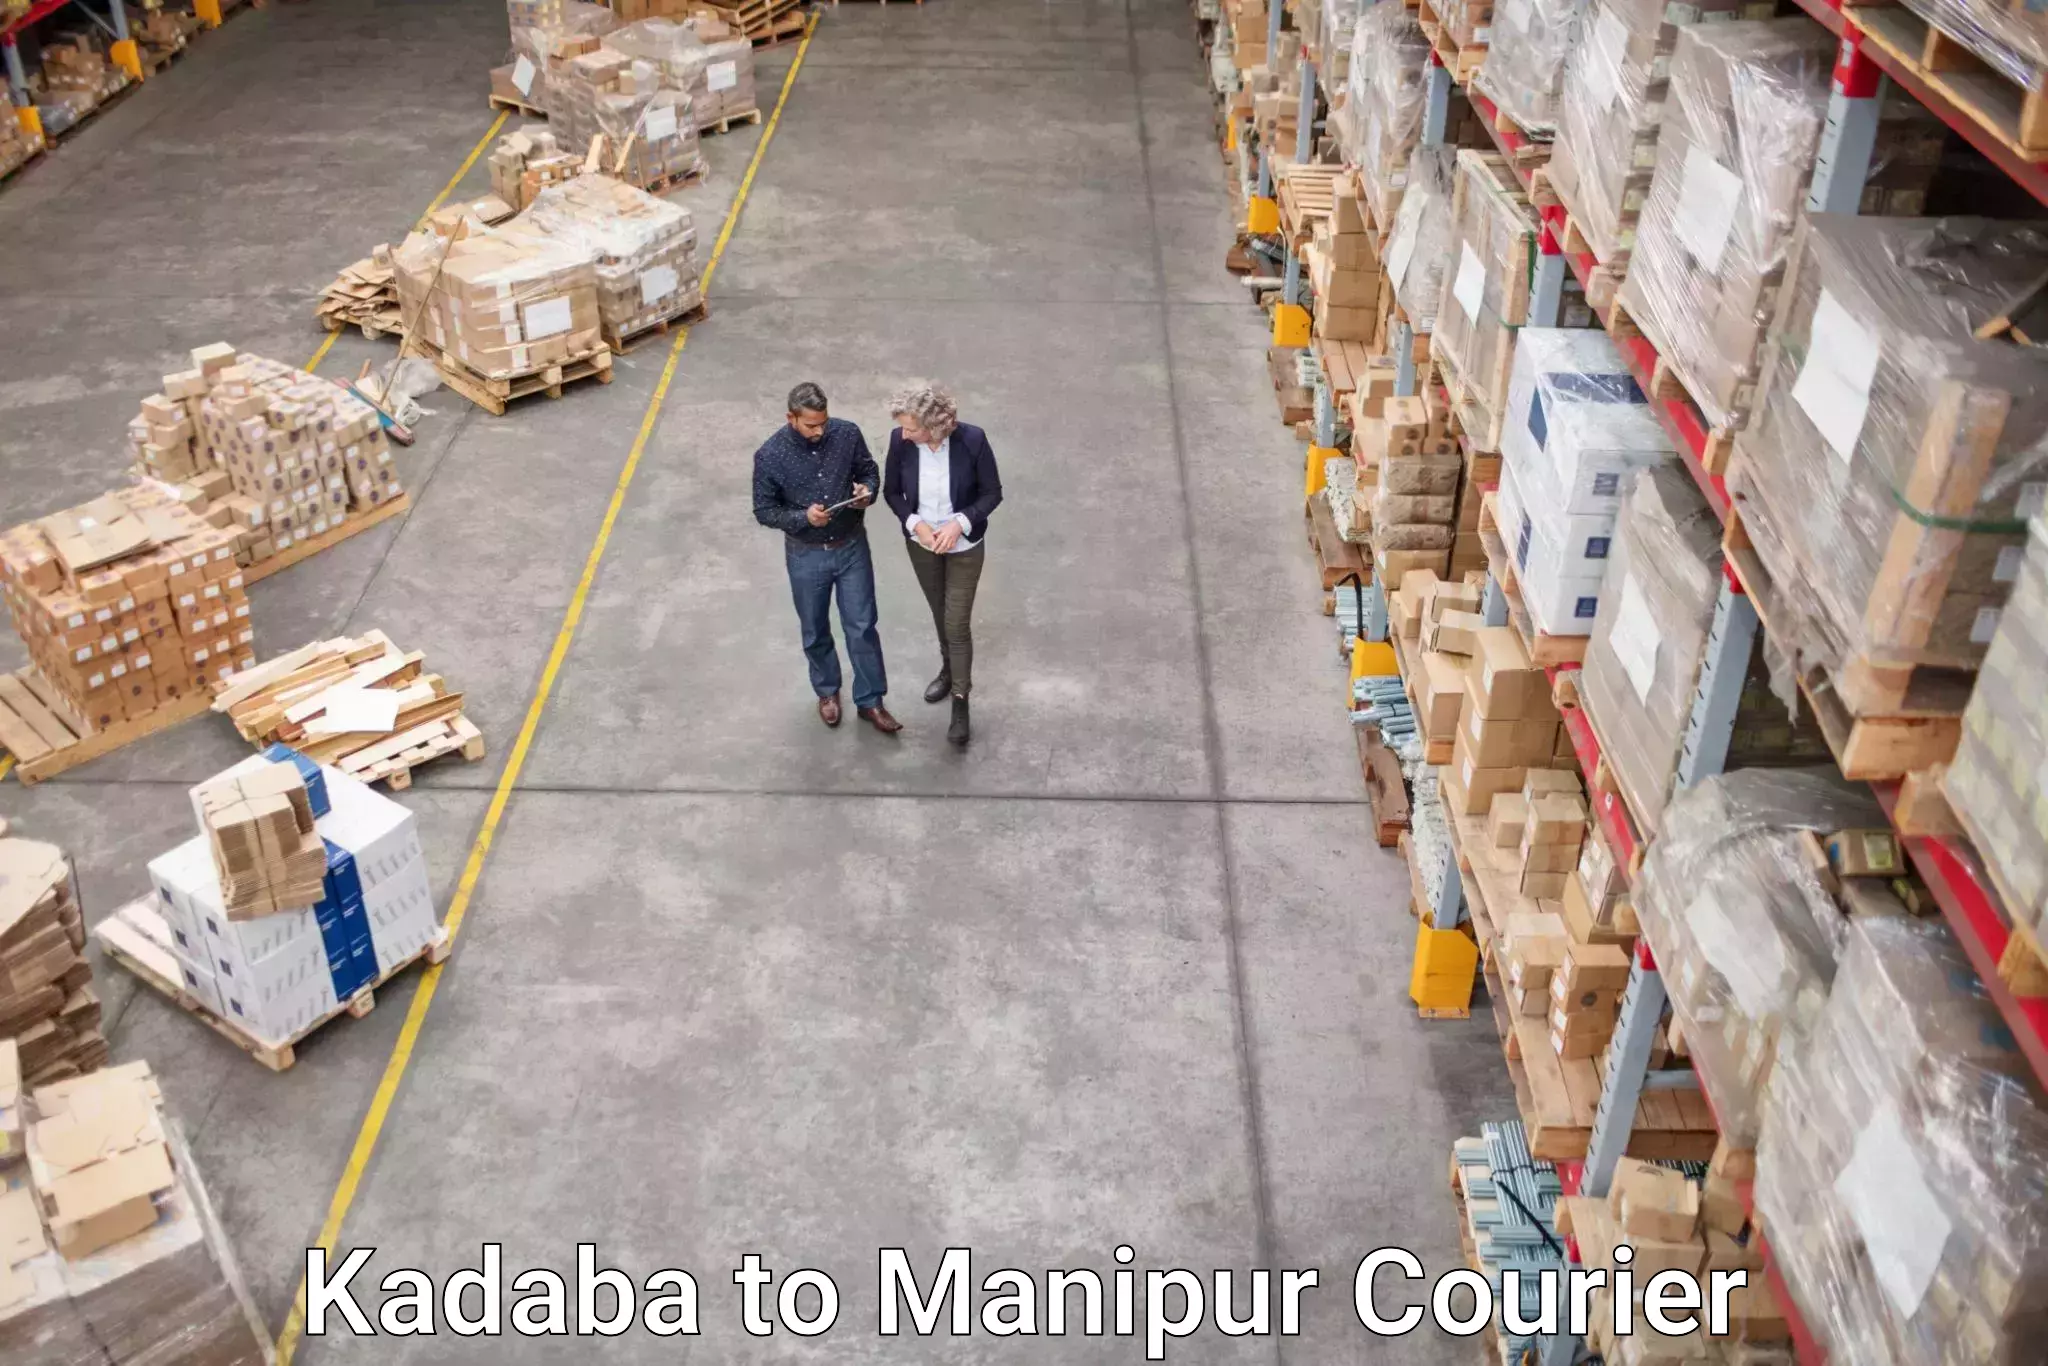 Comprehensive delivery network in Kadaba to Manipur